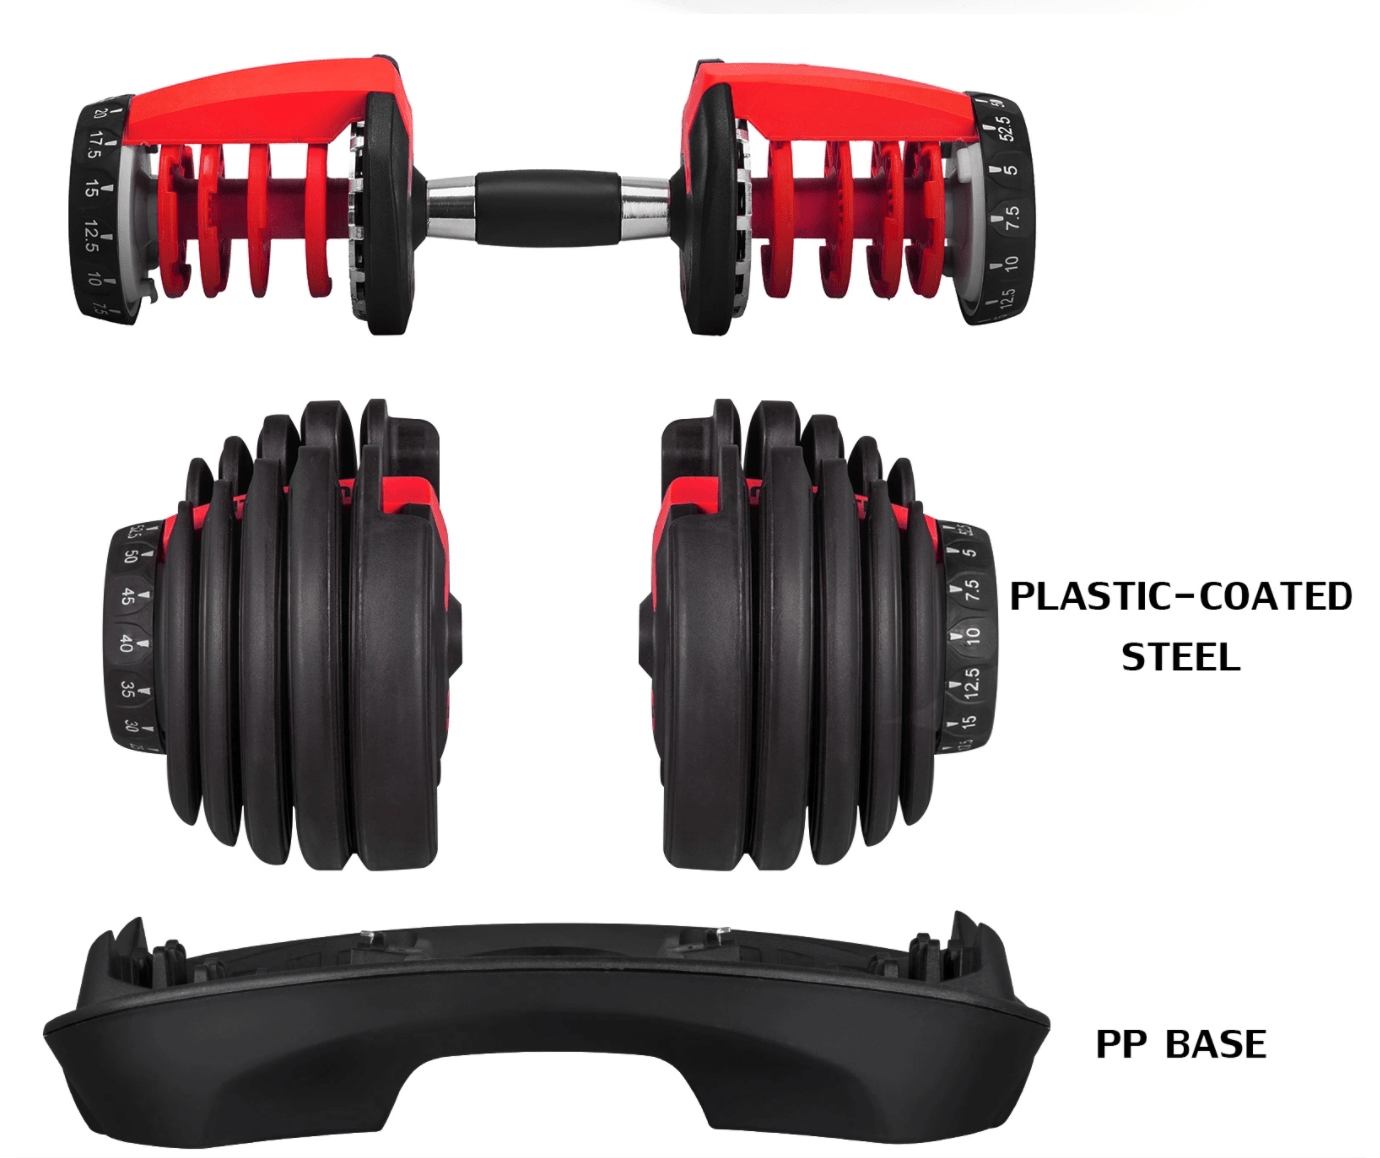 Dumbell (Adjustable Weights)